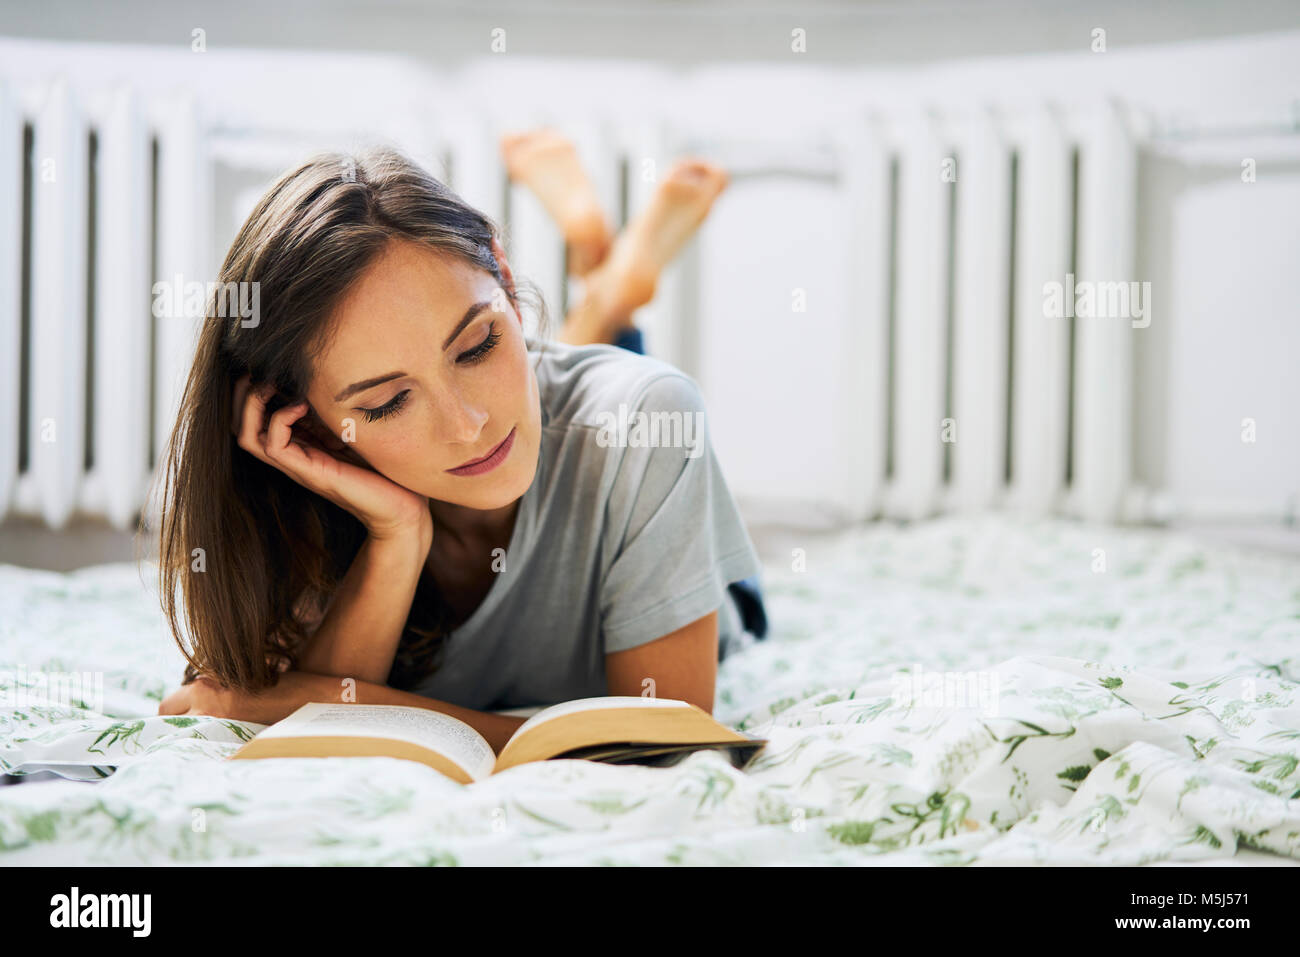 Young woman at home lying in bed reading book Stock Photo